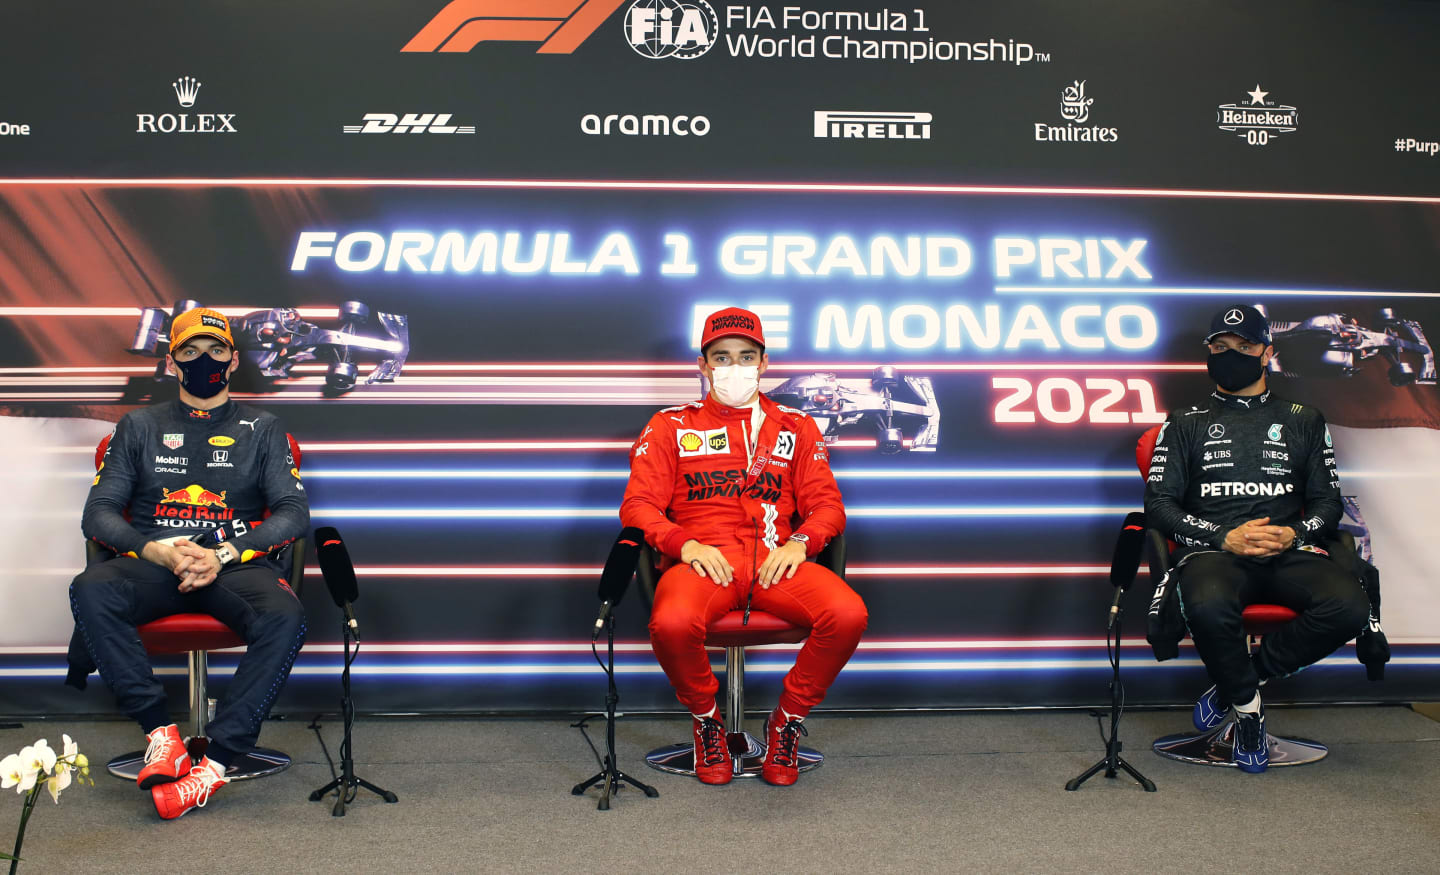 MONTE-CARLO, MONACO - MAY 22: Second placed qualifier Max Verstappen of Netherlands and Red Bull Racing, pole position qualifier Charles Leclerc of Monaco and Ferrari and third placed qualifier Valtteri Bottas of Finland and Mercedes GP talk during a Press Conference after qualifying prior to the F1 Grand Prix of Monaco at Circuit de Monaco on May 22, 2021 in Monte-Carlo, Monaco. (Photo by Zak Mauger - Pool/Getty Images)